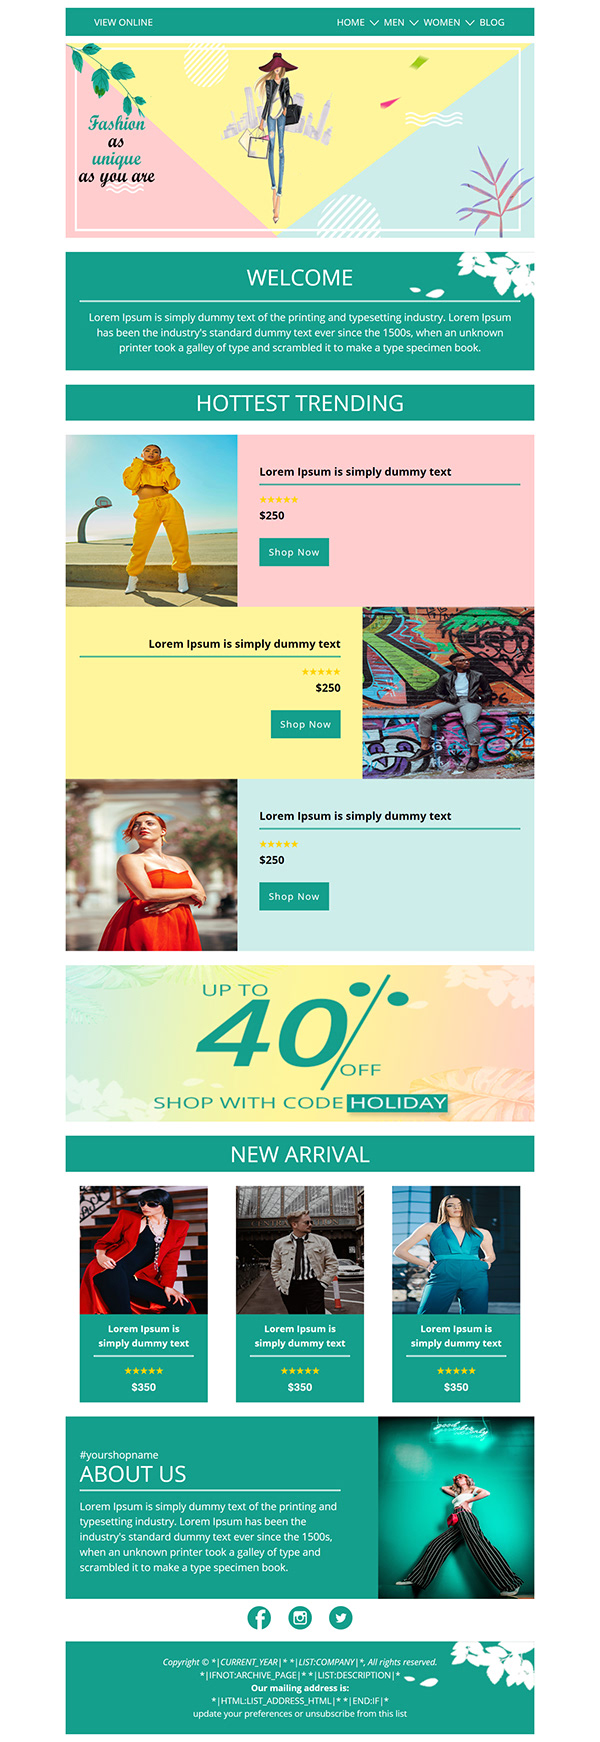 Ecommerce Email Template | Email Newsletter | Mailchimp